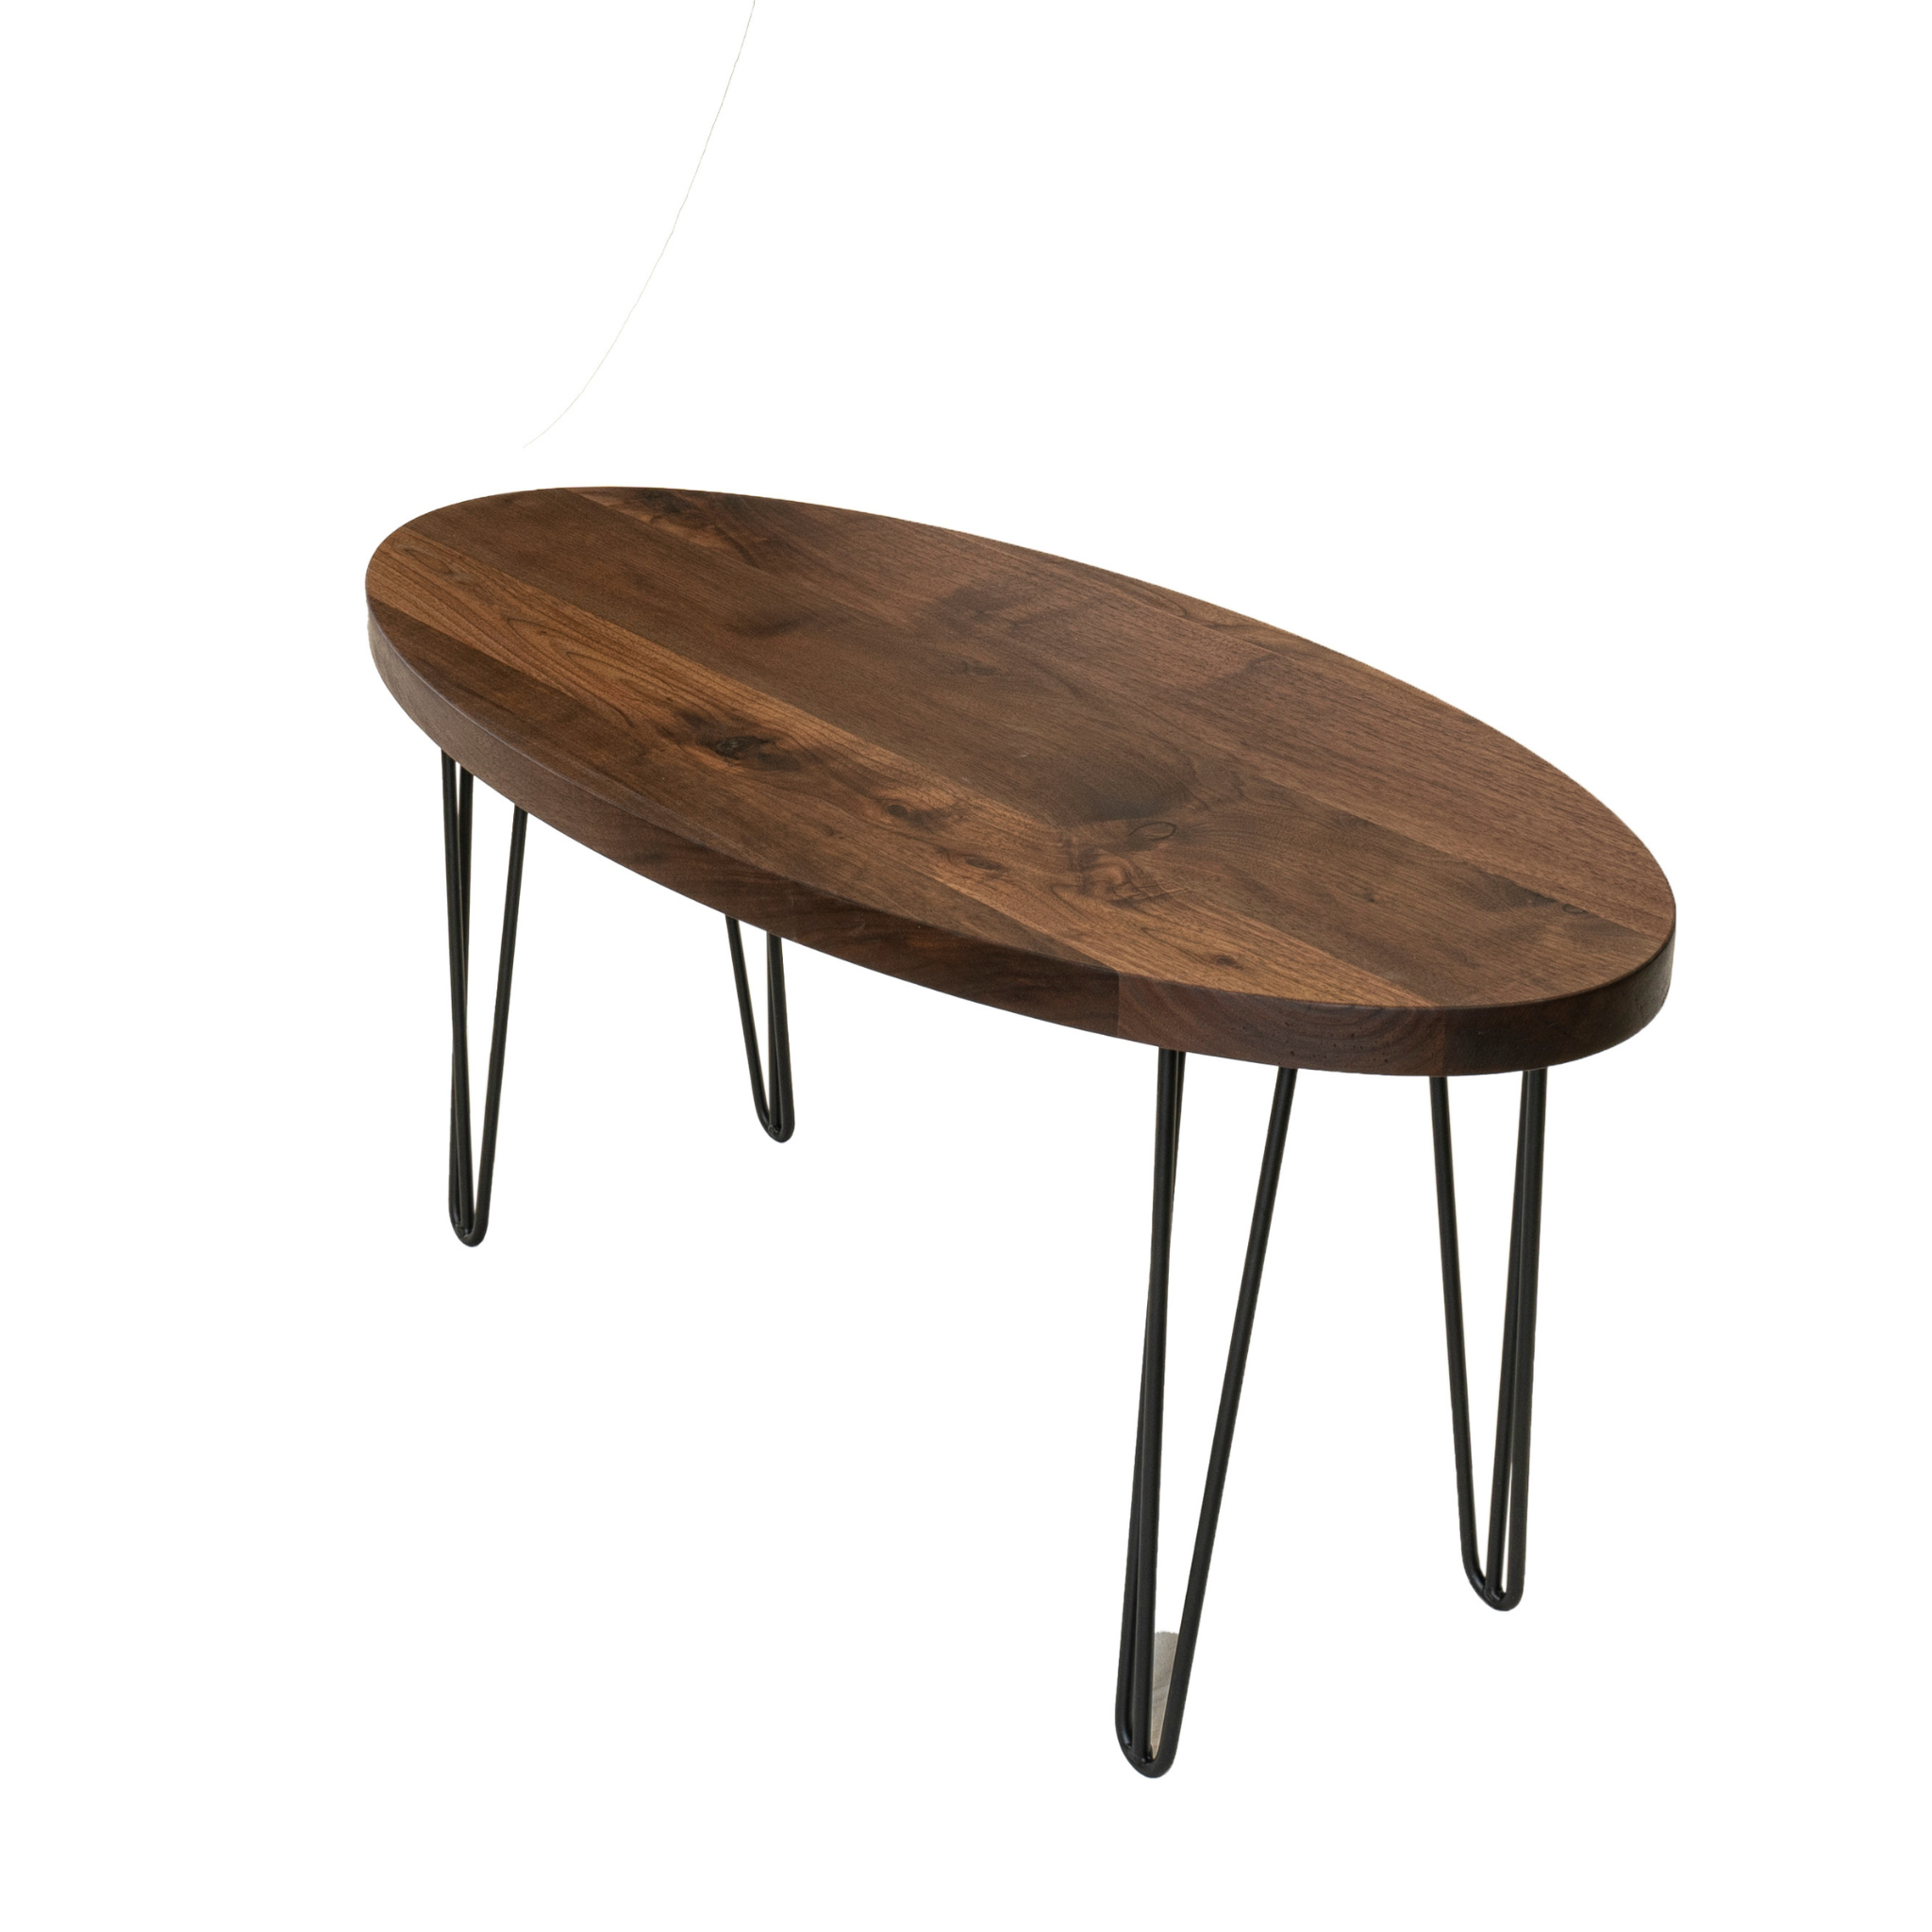 Oval coffee table for living room. Designed by Urban Industrial Design.